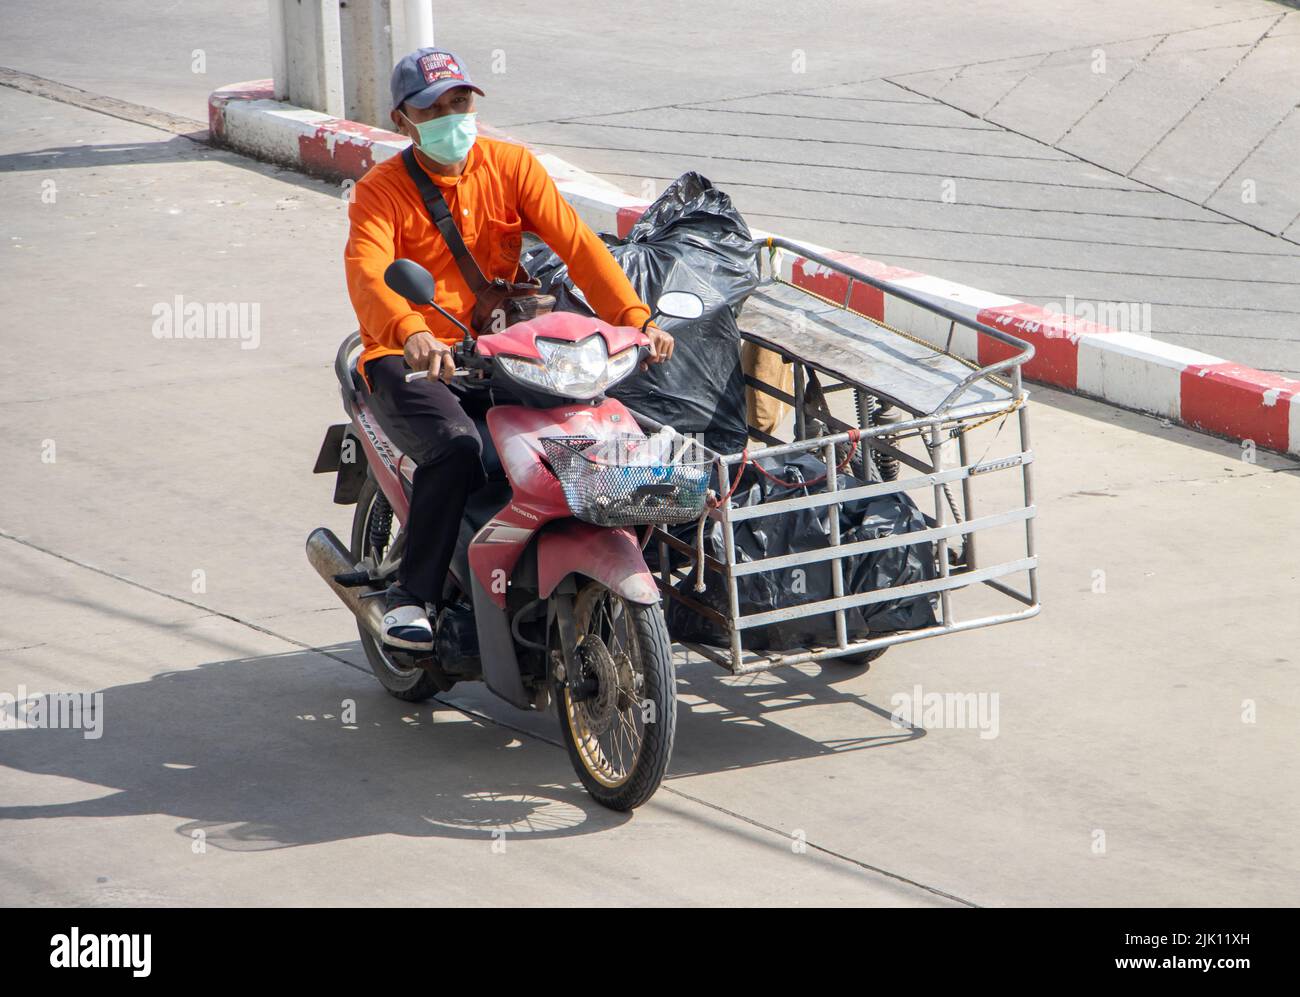 SAMUT PRAKAN, THAILAND, MAY 30 2022, Motorcyclist rides with cart full of plastic bags with recyclable waste Stock Photo